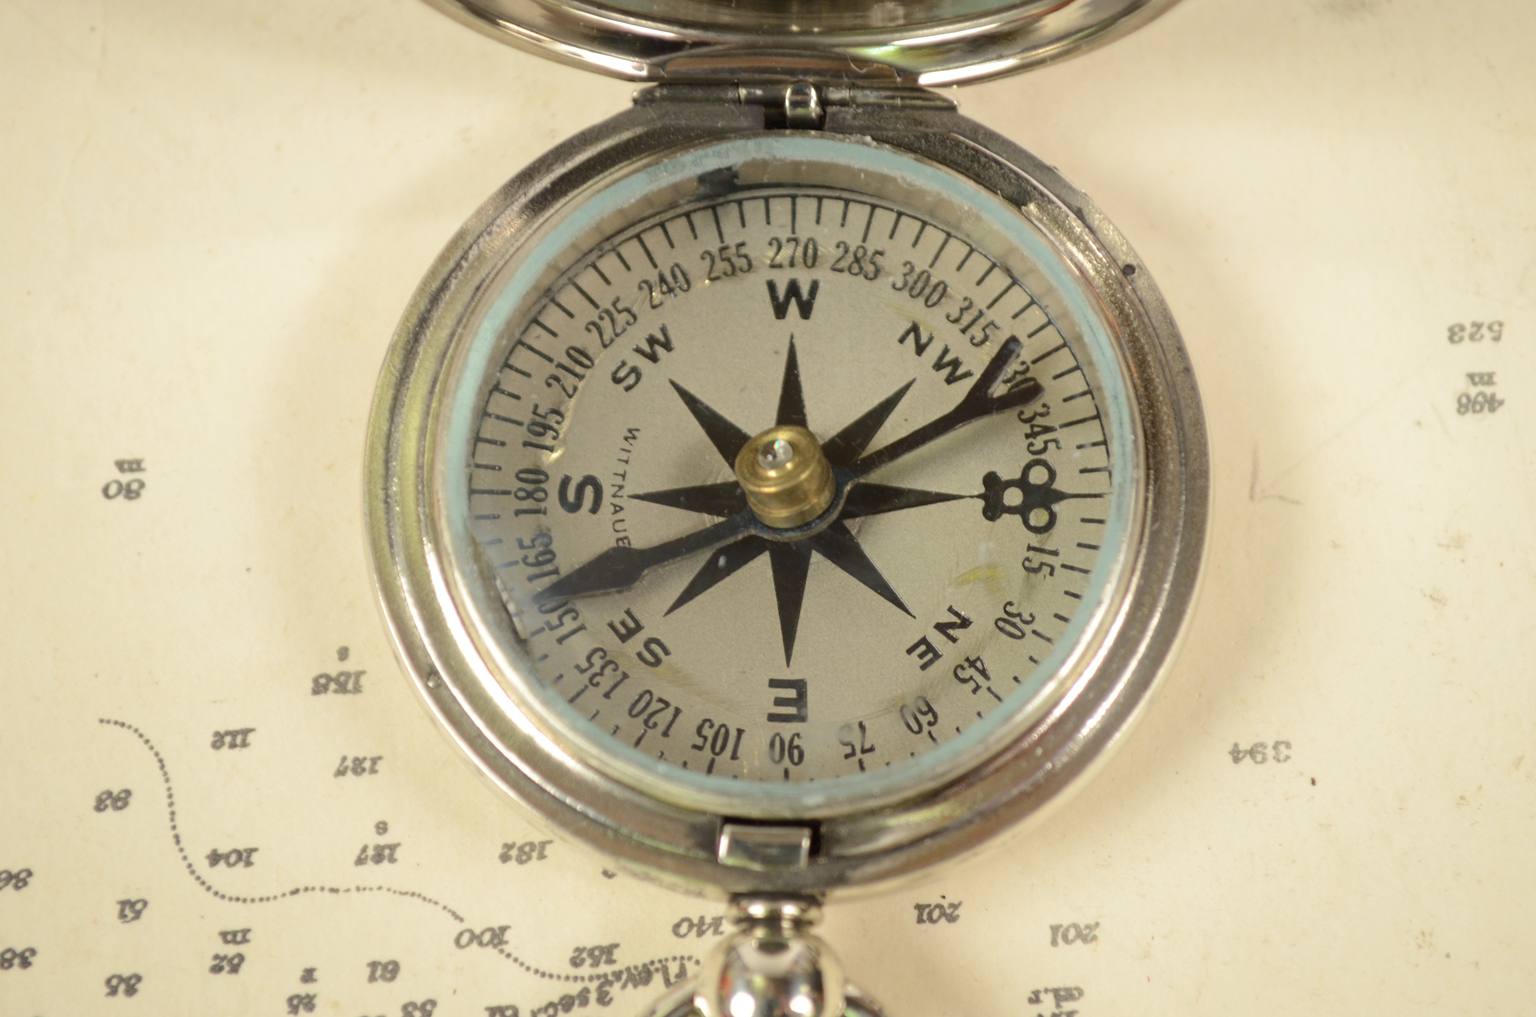 military compass and protractor